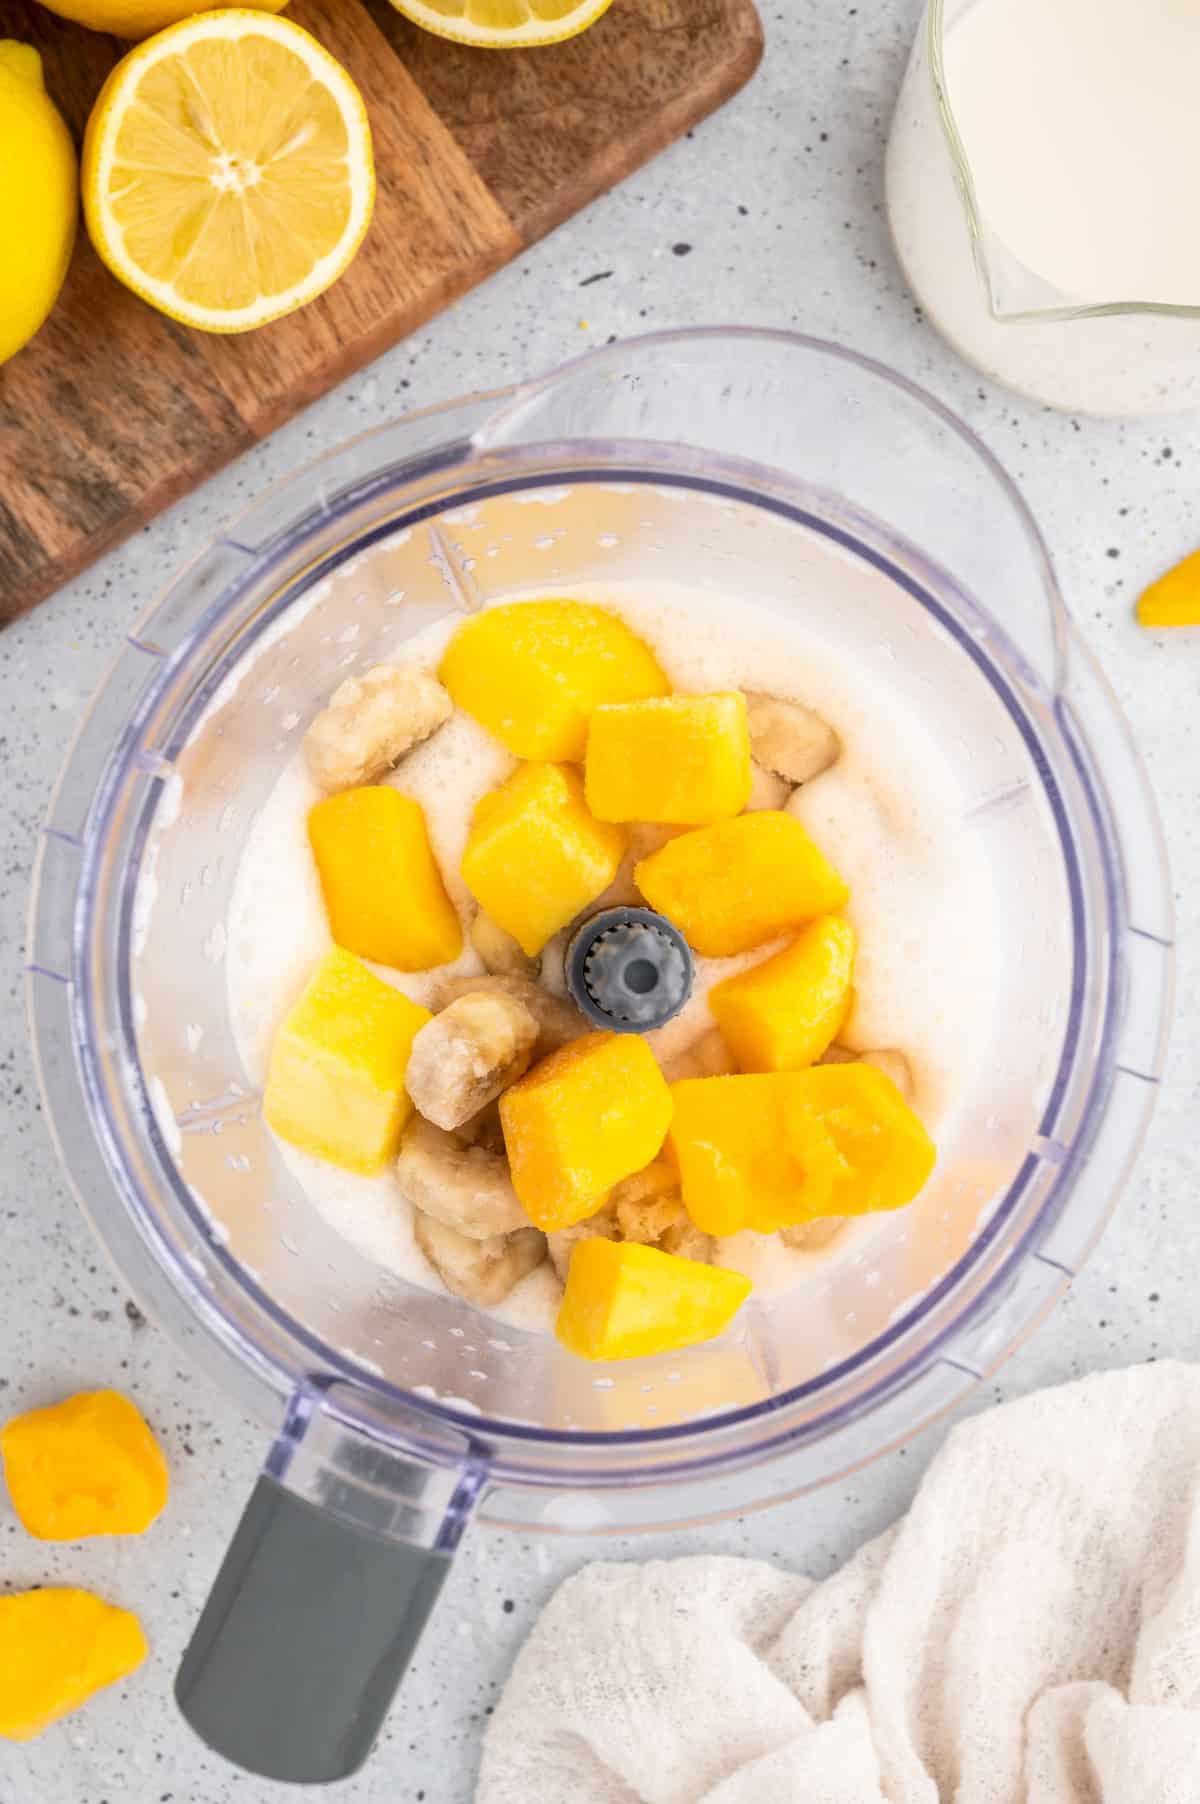 Mango added on top of the other ingredients in the blender.